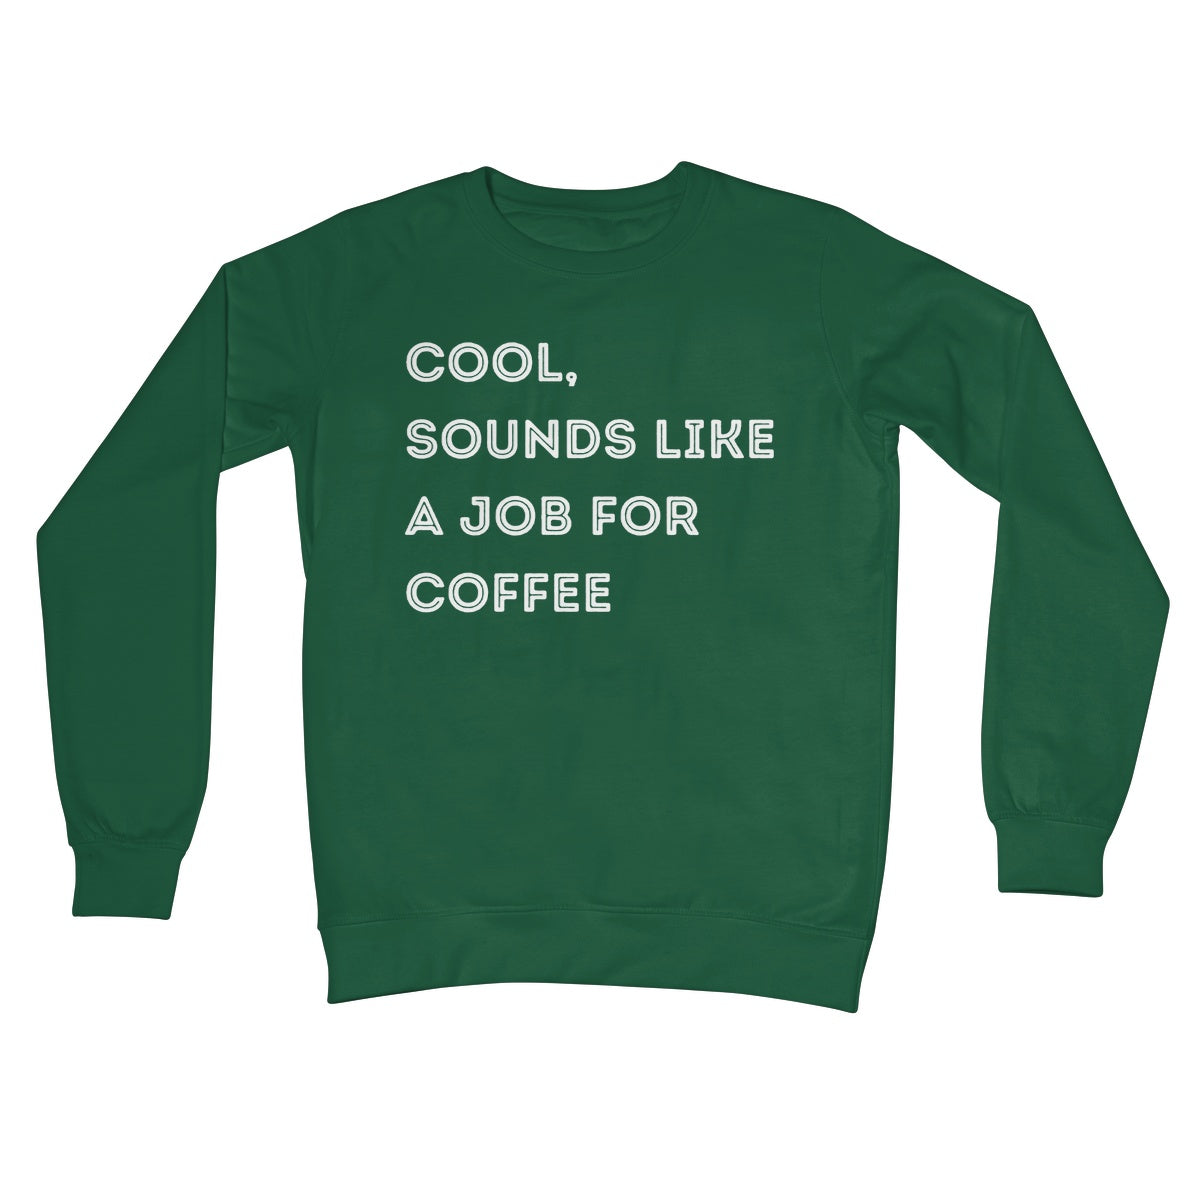 sounds like a job for coffee jumper green